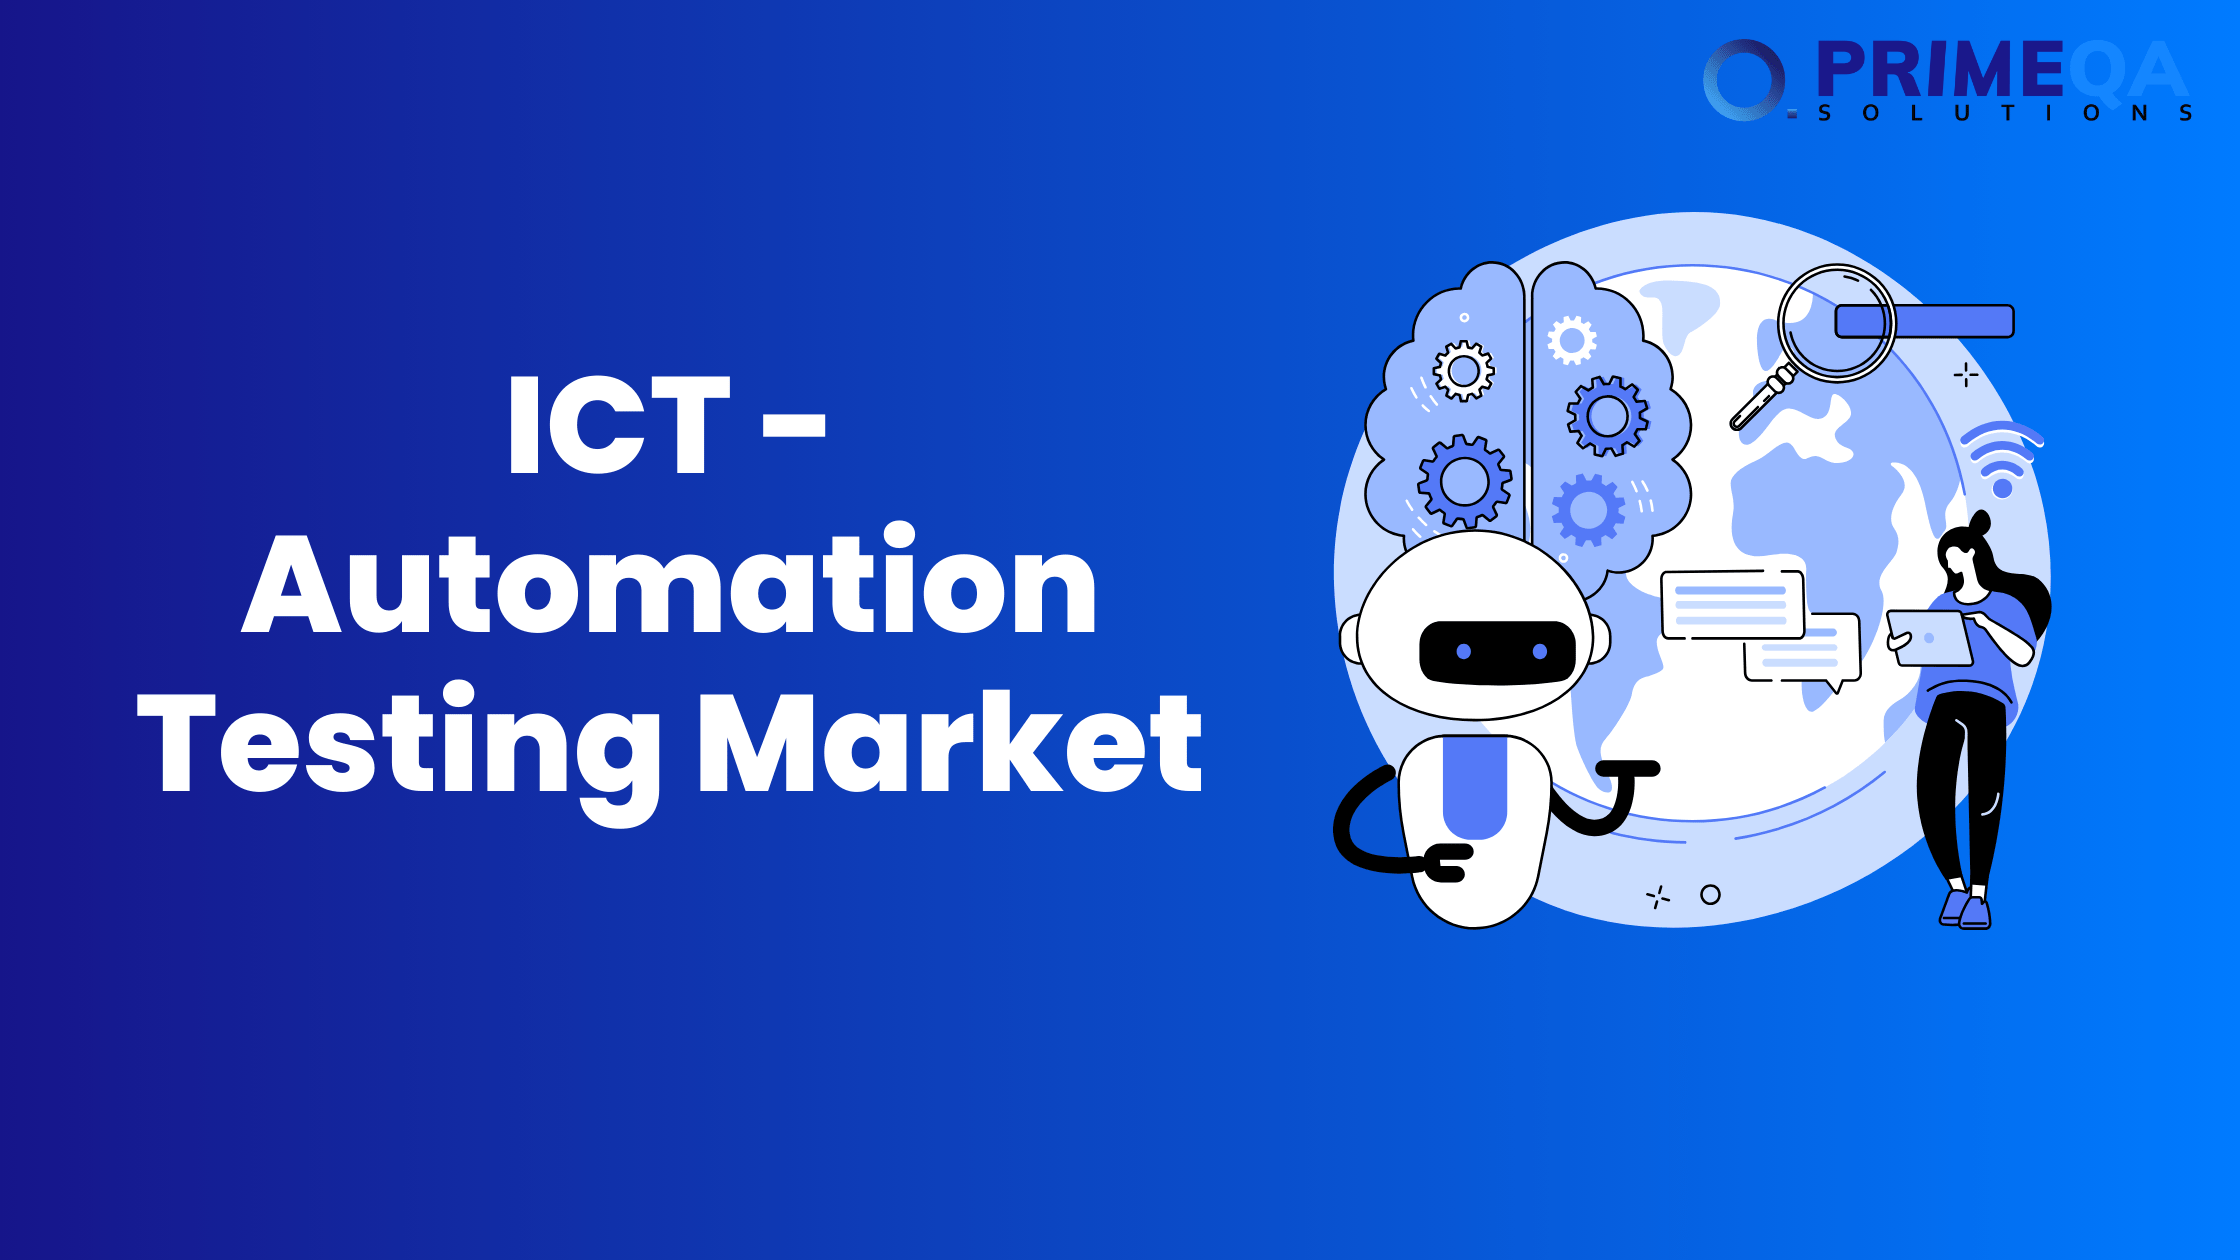 ICT in Automation Testing